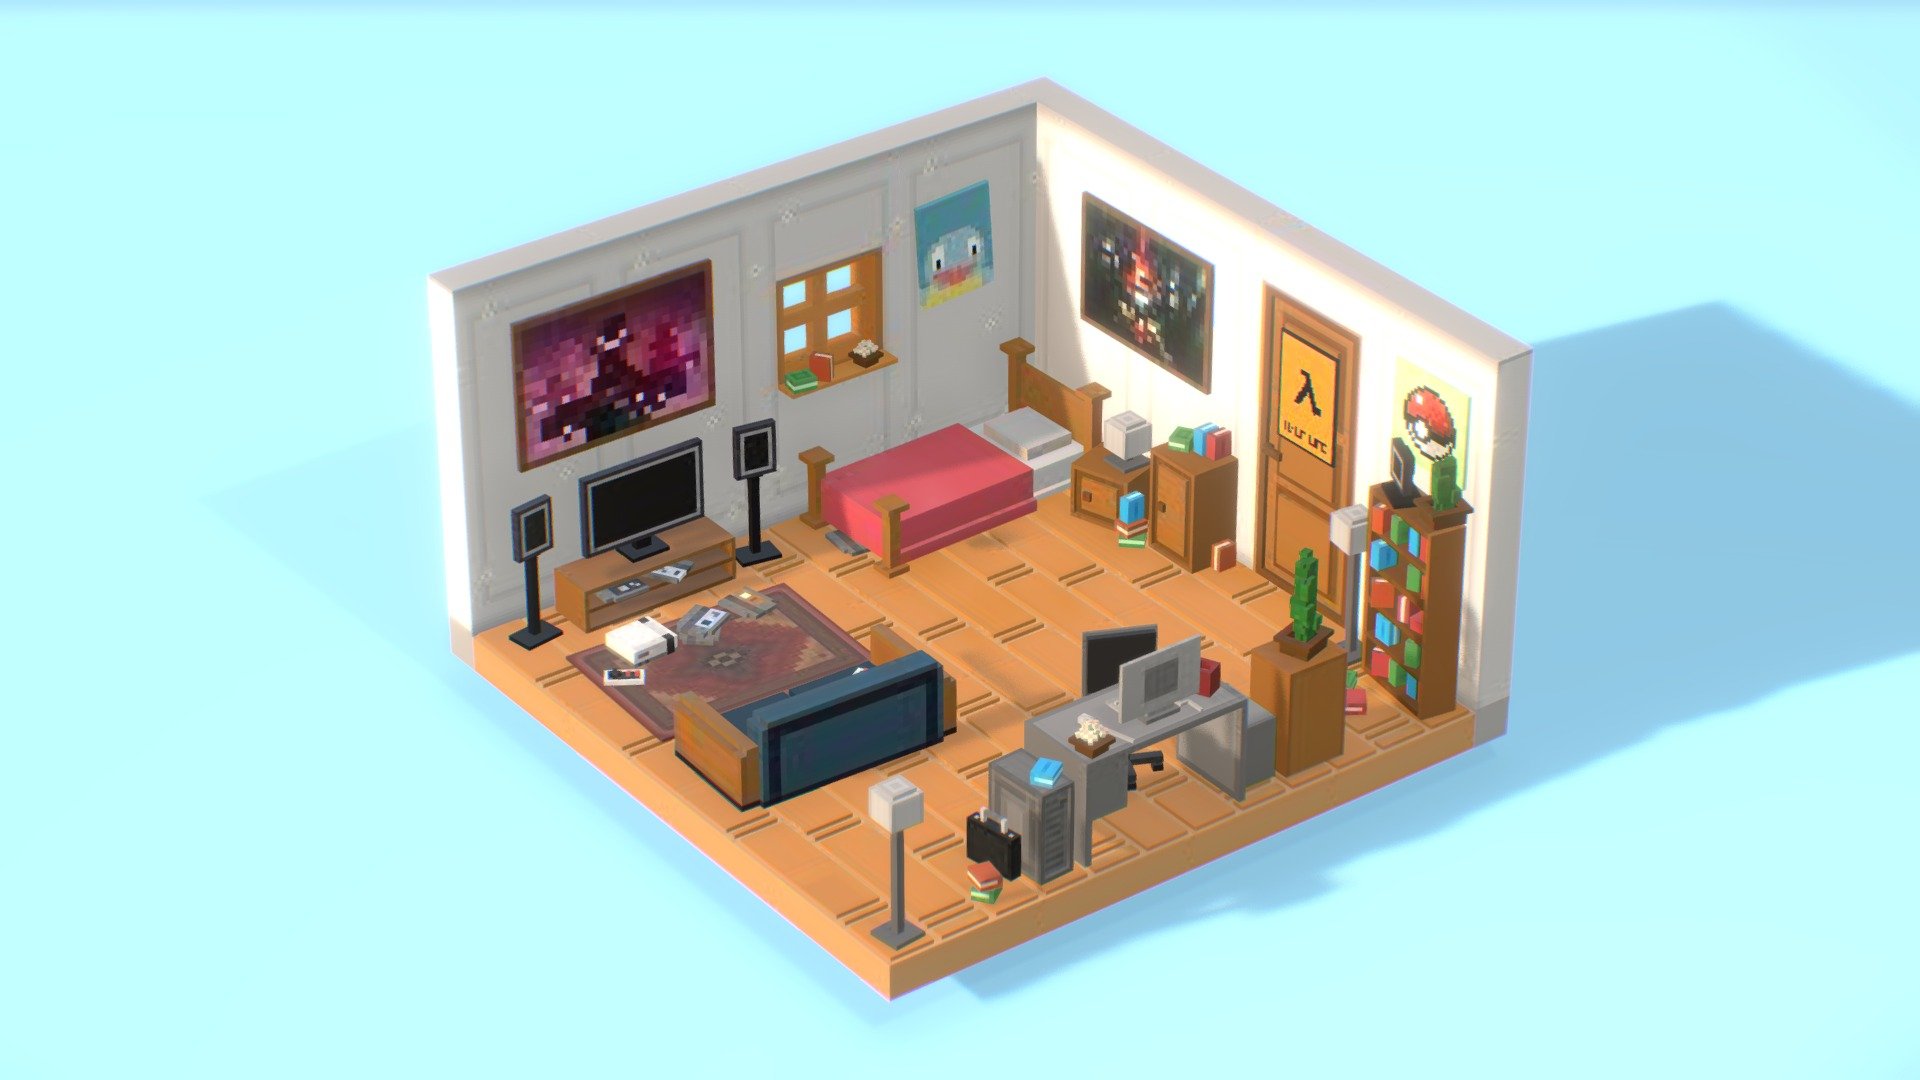 A nostalgia room &amp; Messy office assets!

100+ fbx voxel objects in total including

Floor and wall variations (office + room) Couches, beds, vases, tables, tv, speakers, closets, fireplace, paintings&hellip; Lots of stuff! 

All assets can be seen here - little voxel room - Buy Royalty Free 3D model by FRΔNCO (@francoface) 3d model